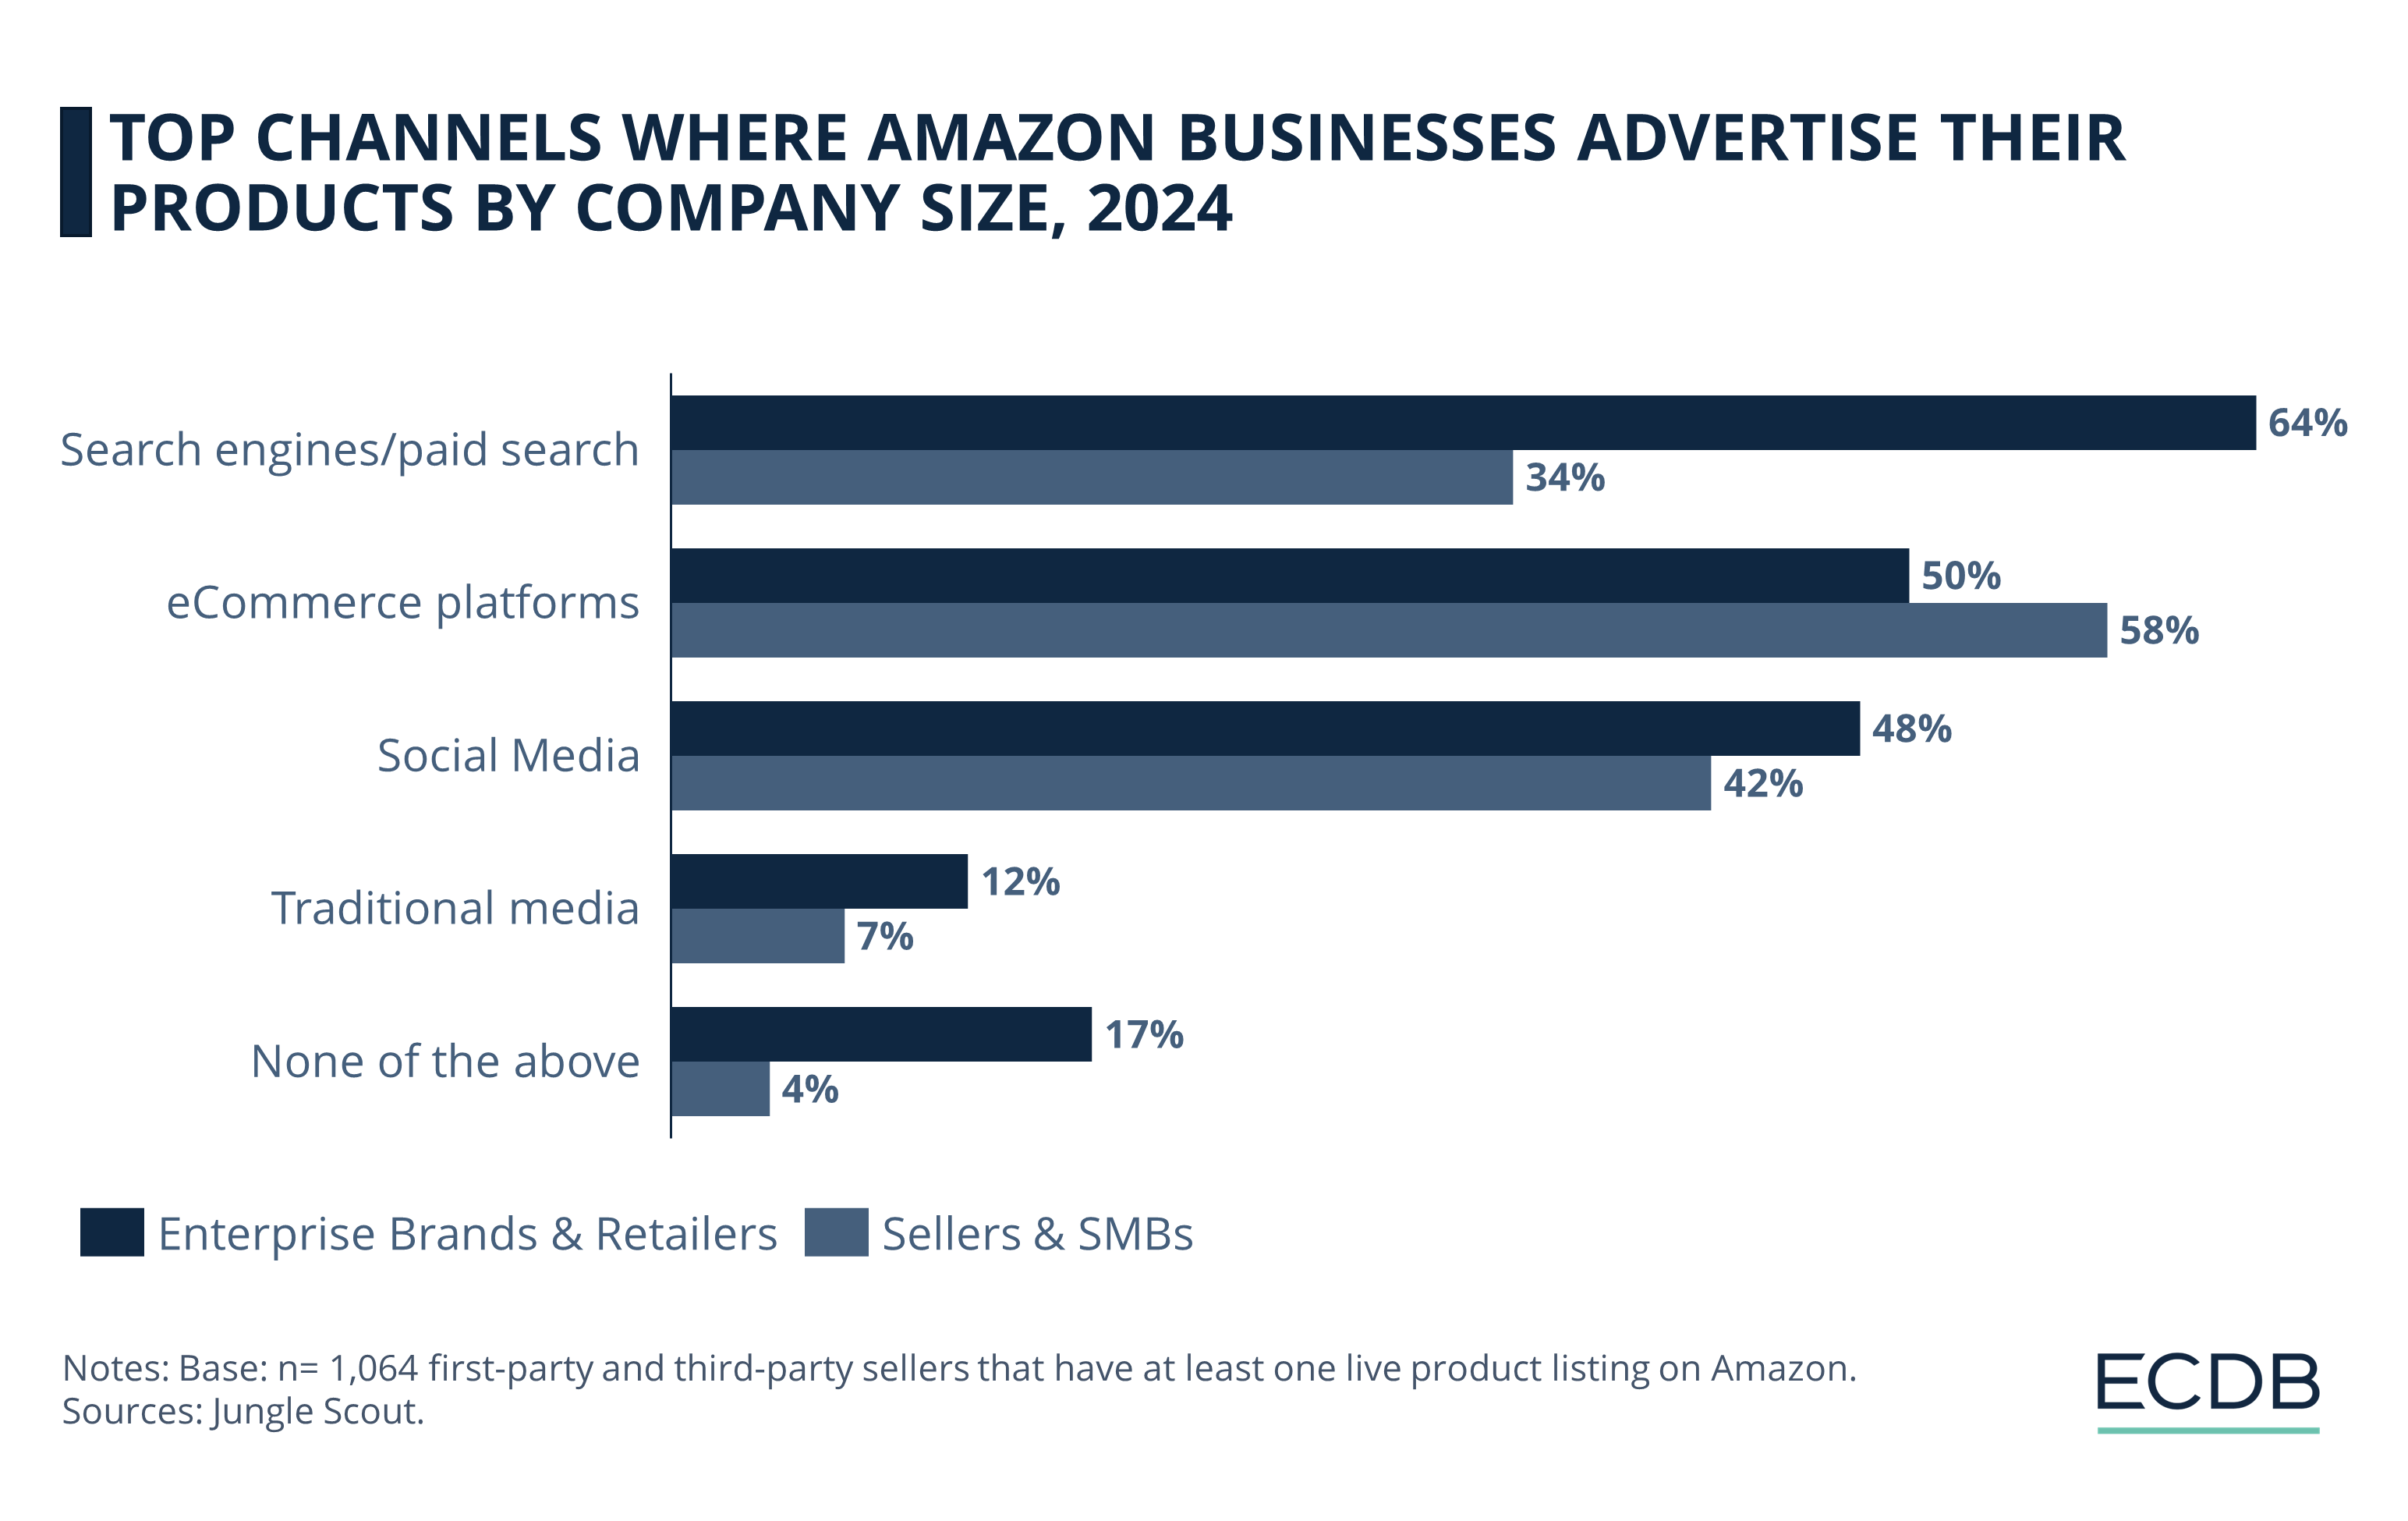 Top Channels Where Amazon Business Advertise Their Products by Company Size, 2024